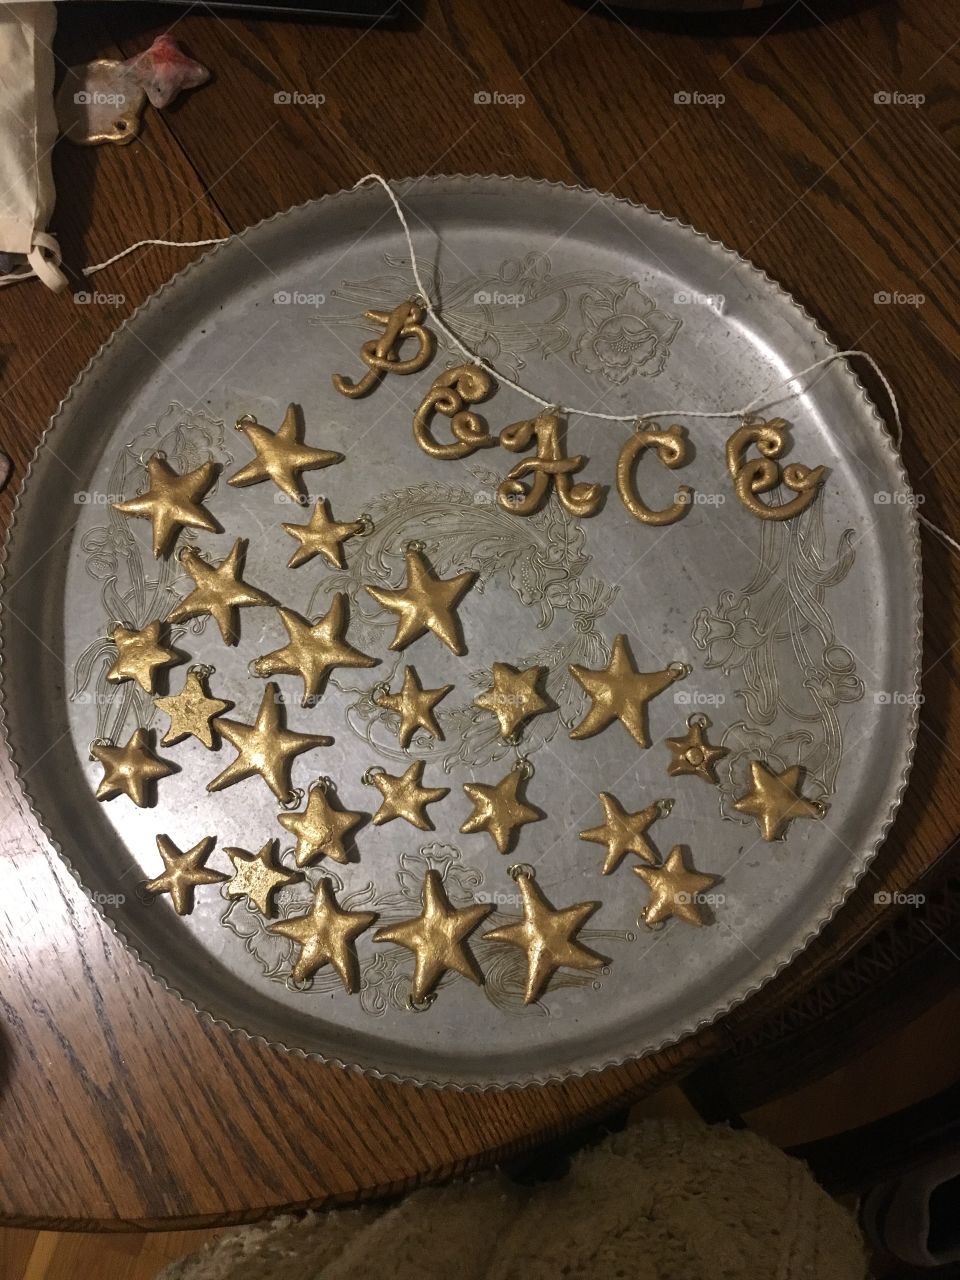 Antique pewter platter with gold painted salt dough Christmas ornament stars and a garland that spells out “Peace”